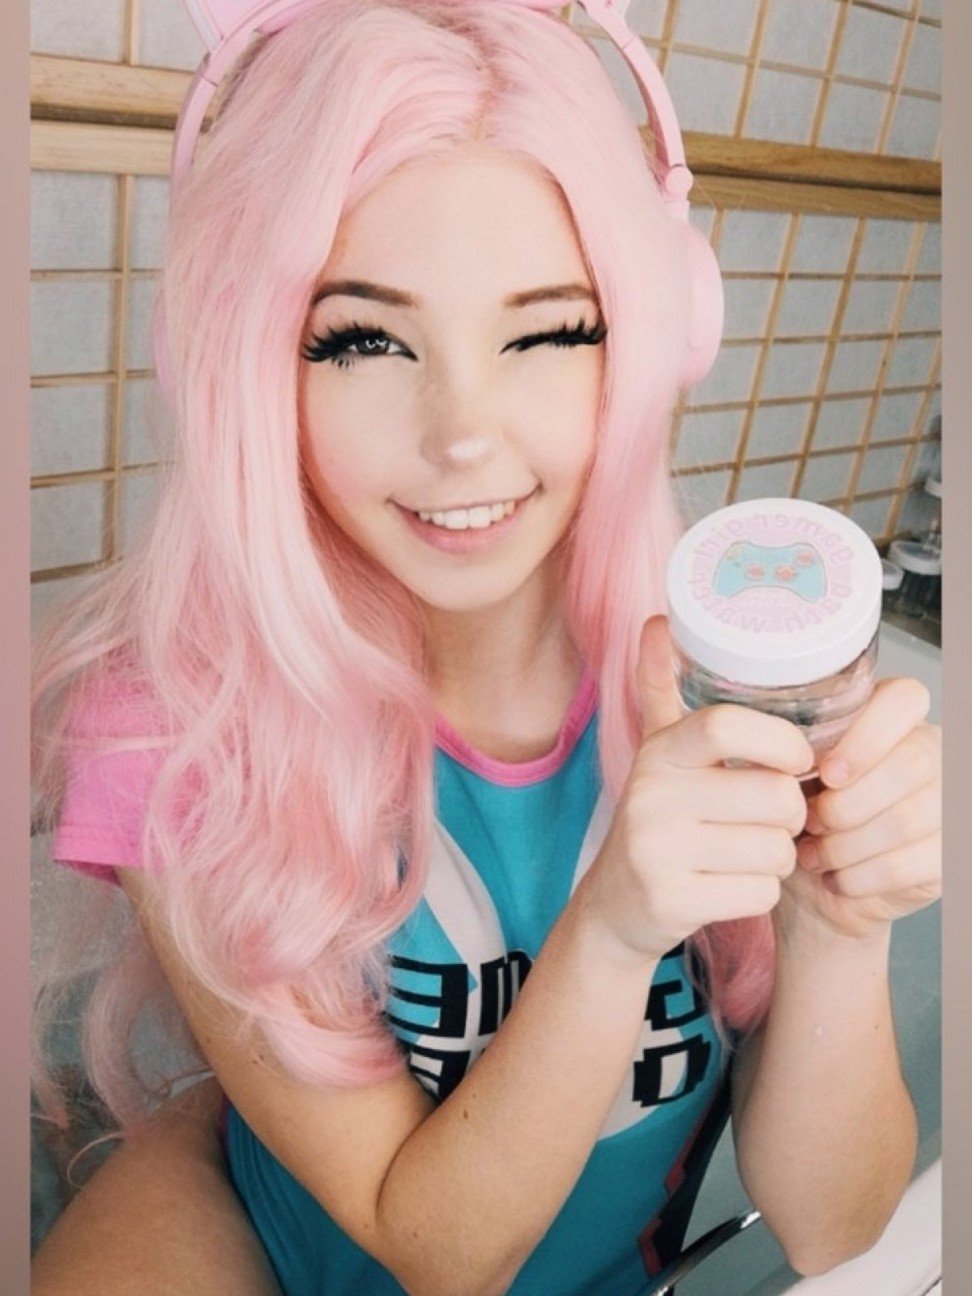 Belle Delphine with a US$30 jar of her bath water for sale.